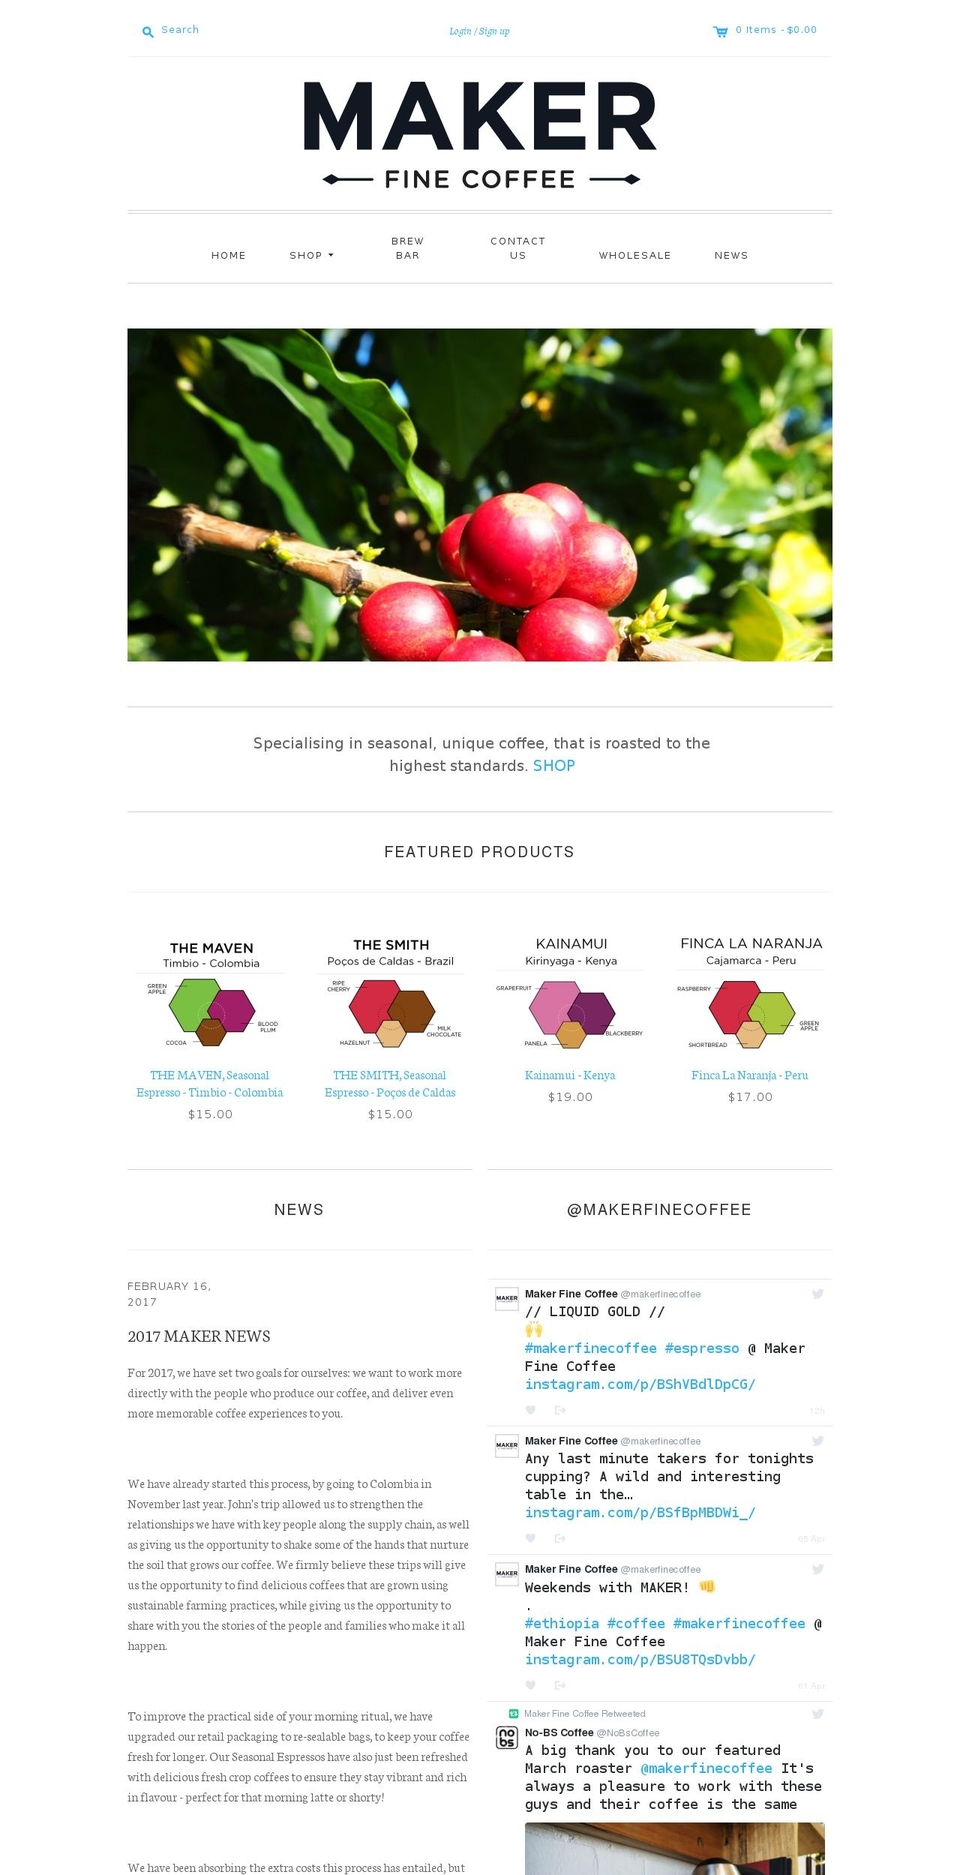 Editions Shopify theme site example makerfinecoffee.com